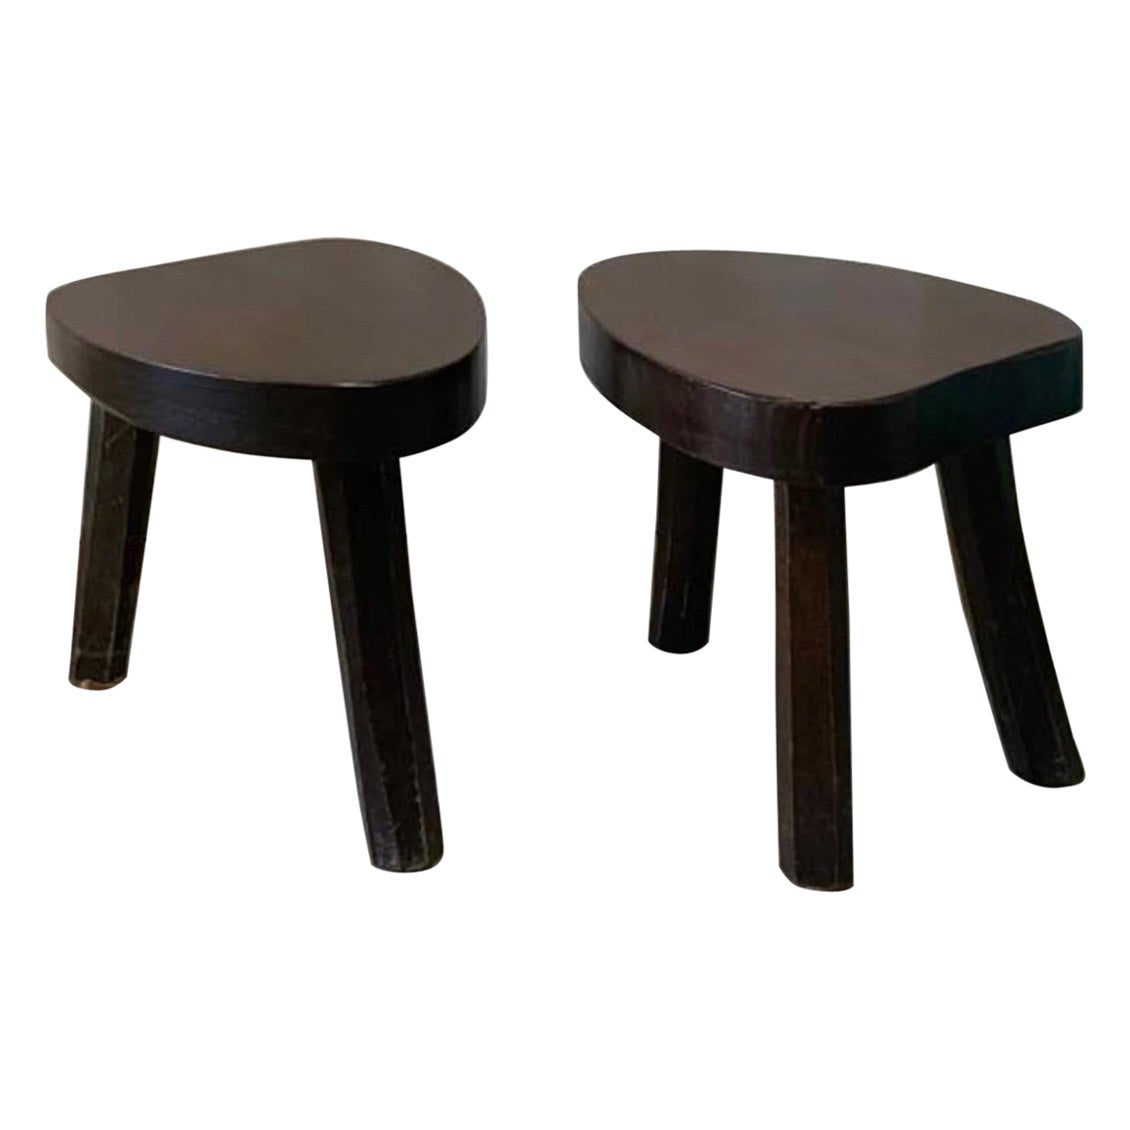 1960 Brutalist French Stools For Sale